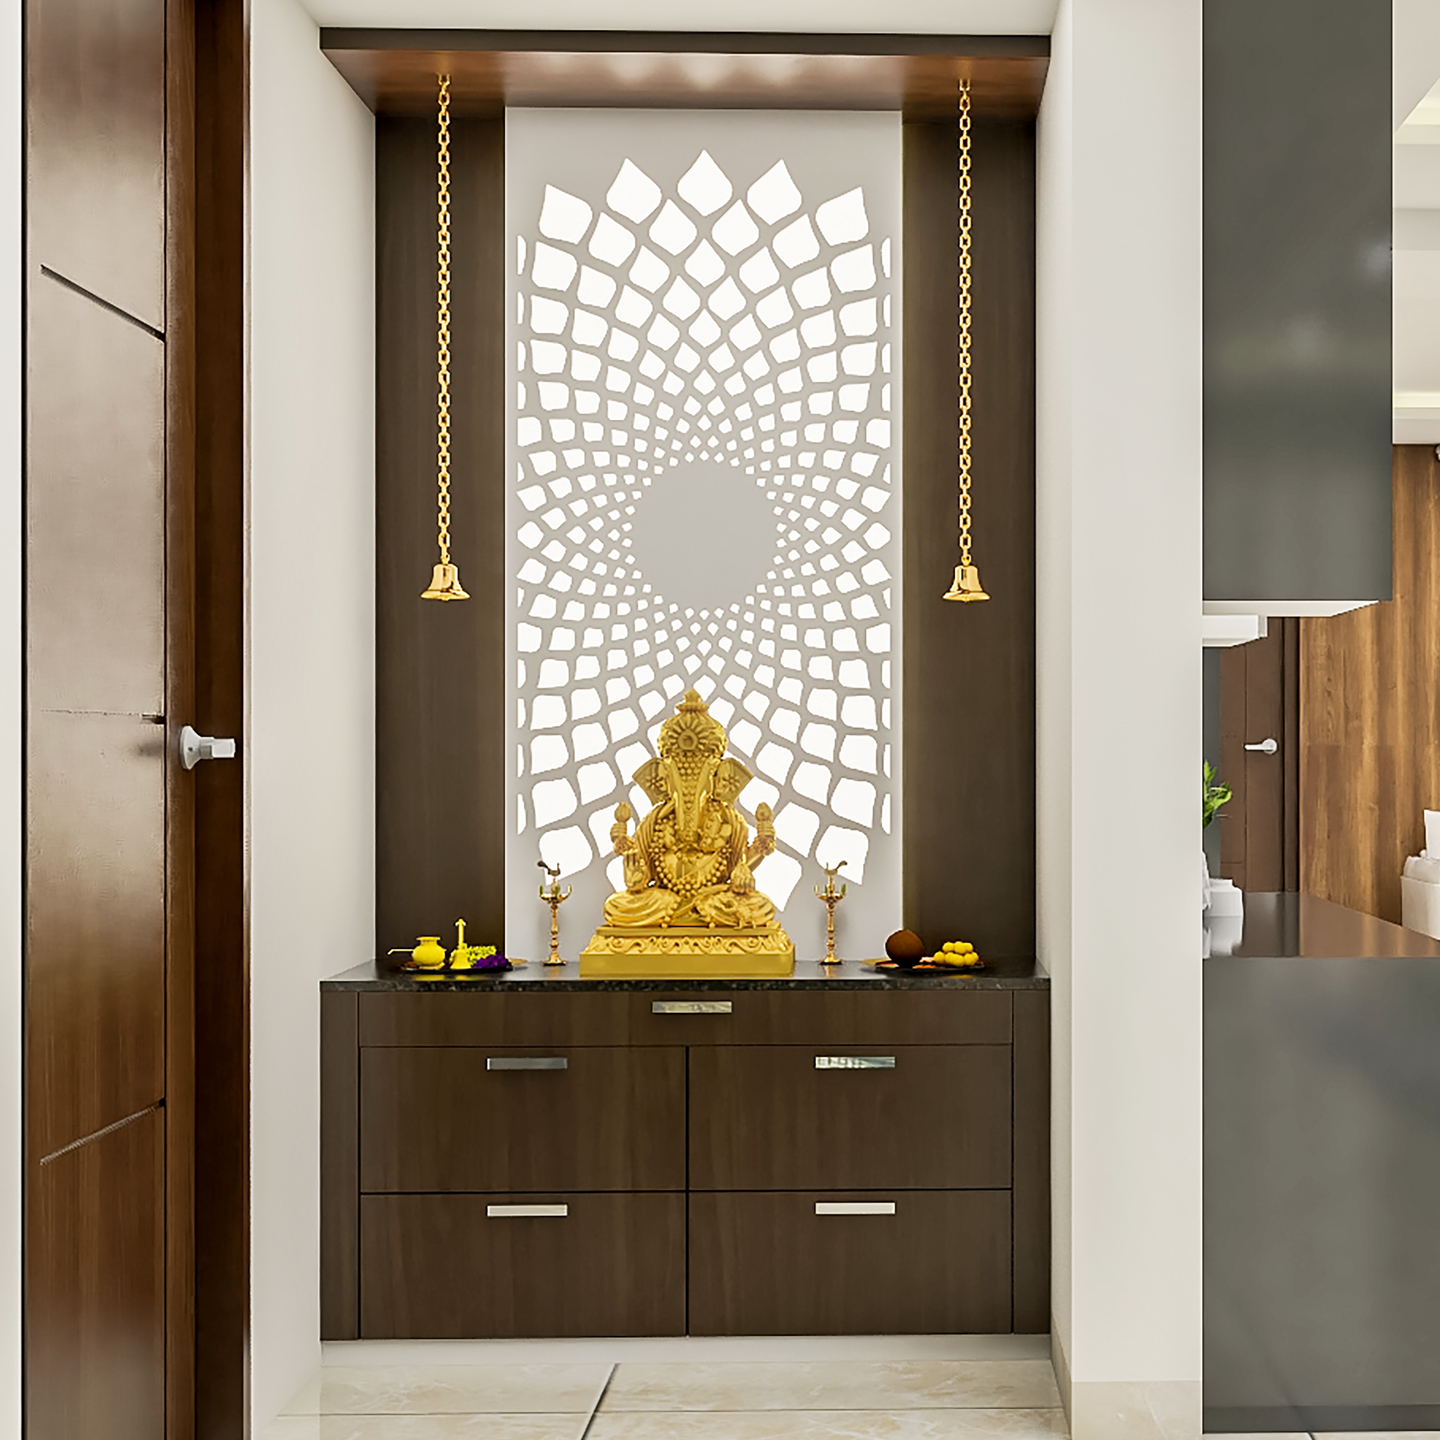 Classic Compact Pooja Room Design with Jali Pattern Backlighting - Livspace